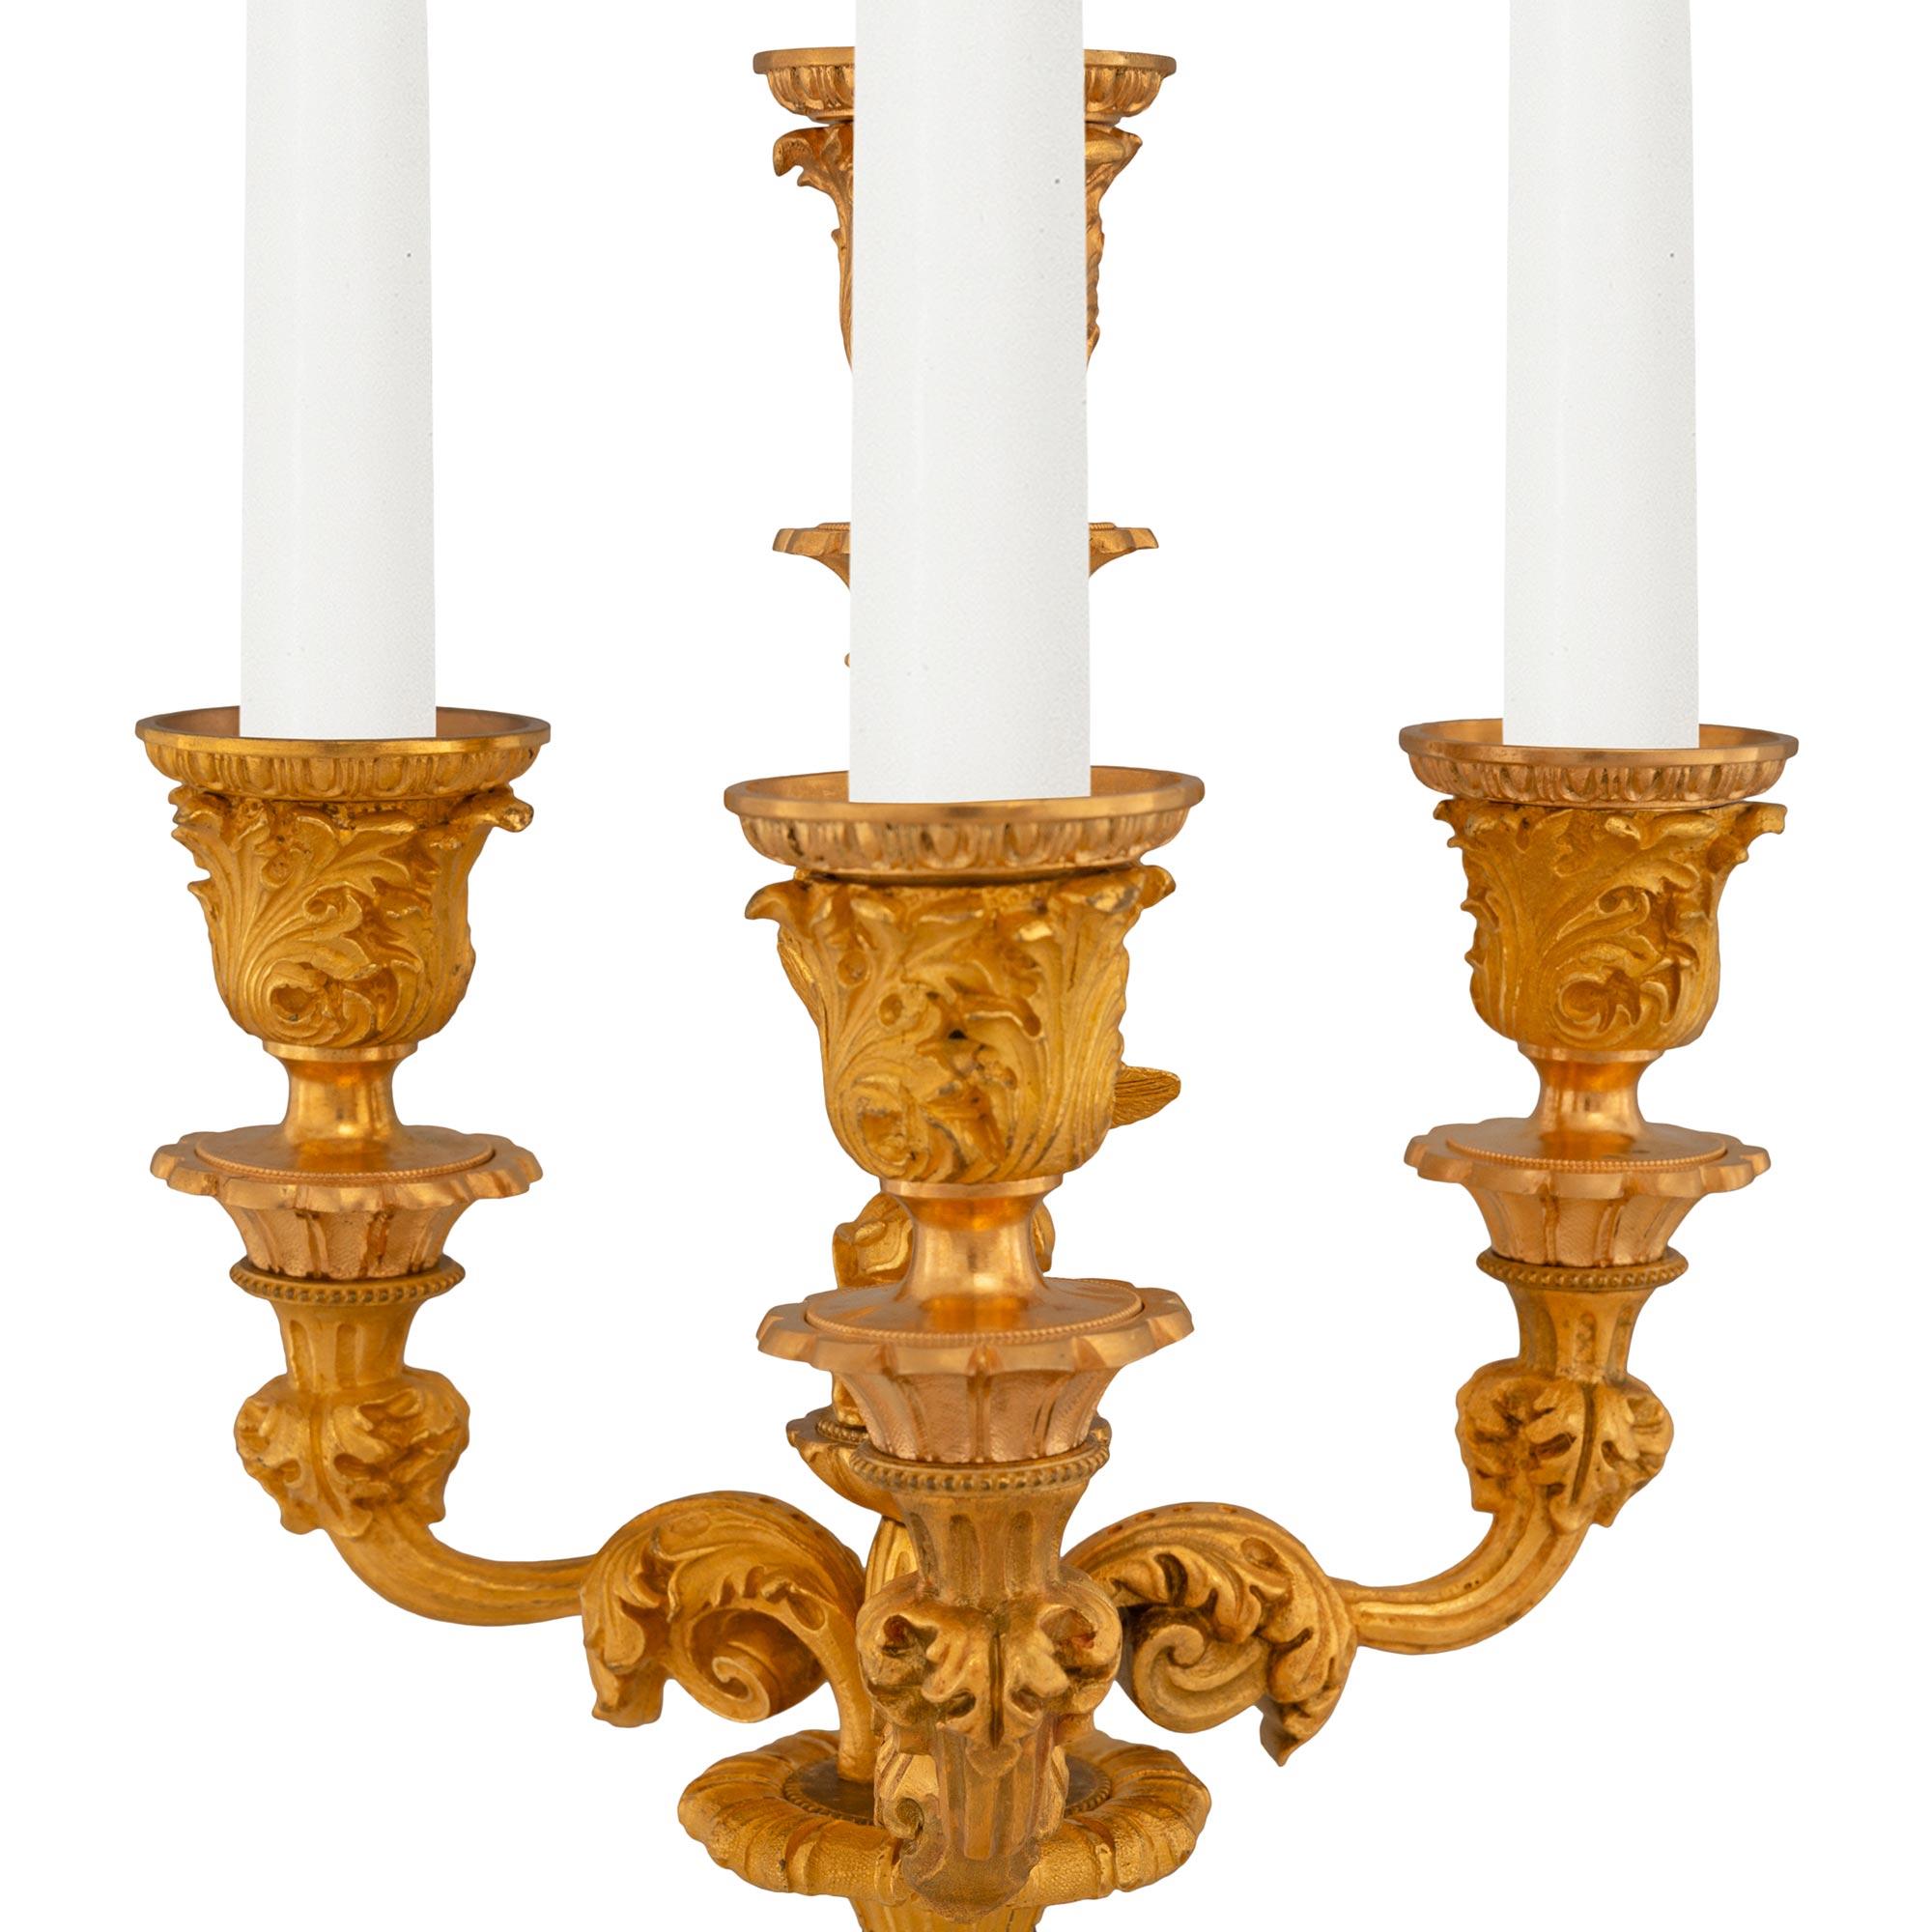 Pair of French 19th Century Charles X Ormolu Four Arm Candelabras In Good Condition For Sale In West Palm Beach, FL